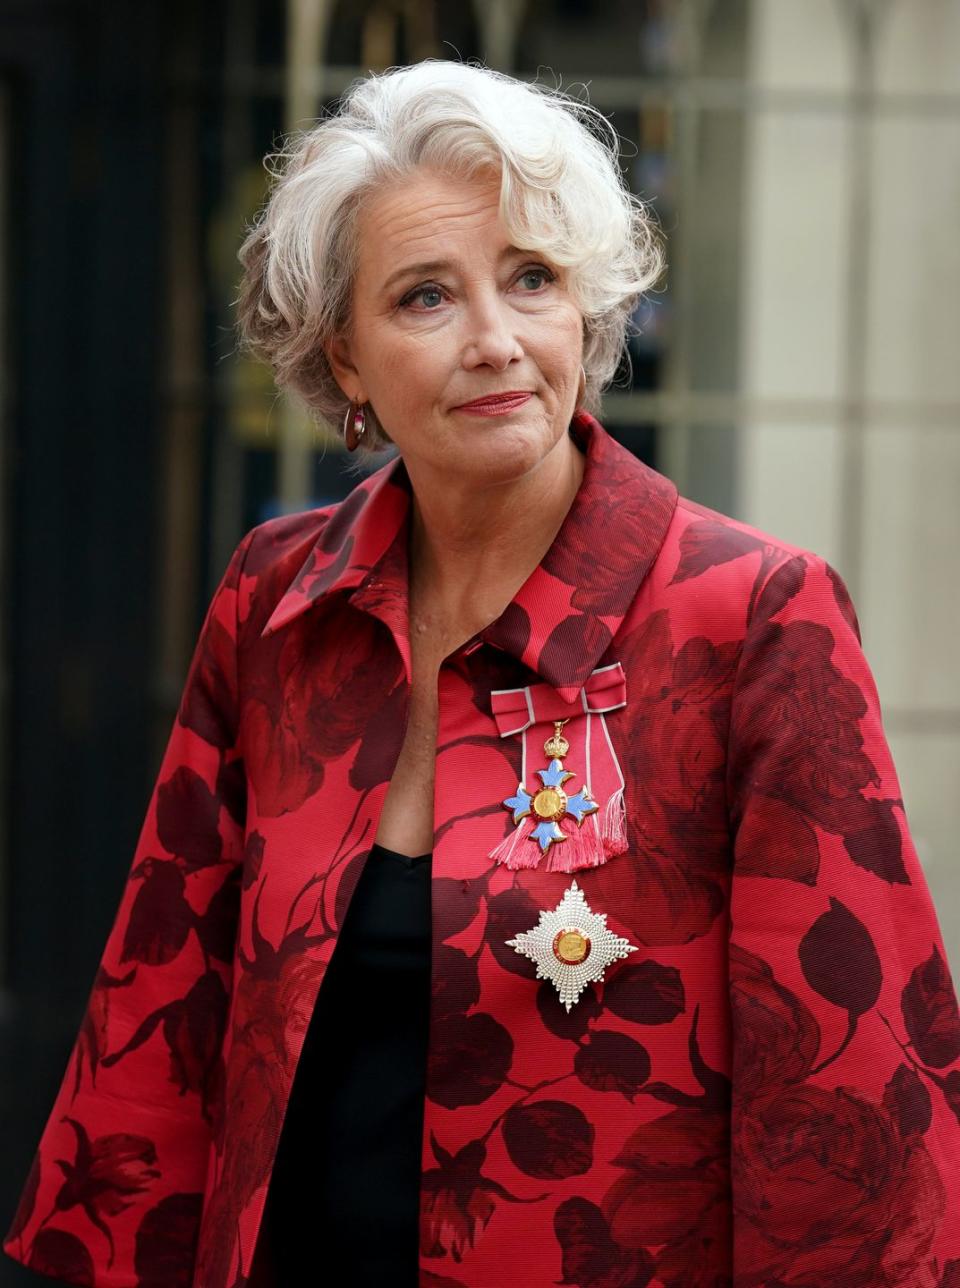 actress emma thompson arrives at westminster abbey ahead of the coronation of king charles iii and queen camilla wearing a red floral jacket